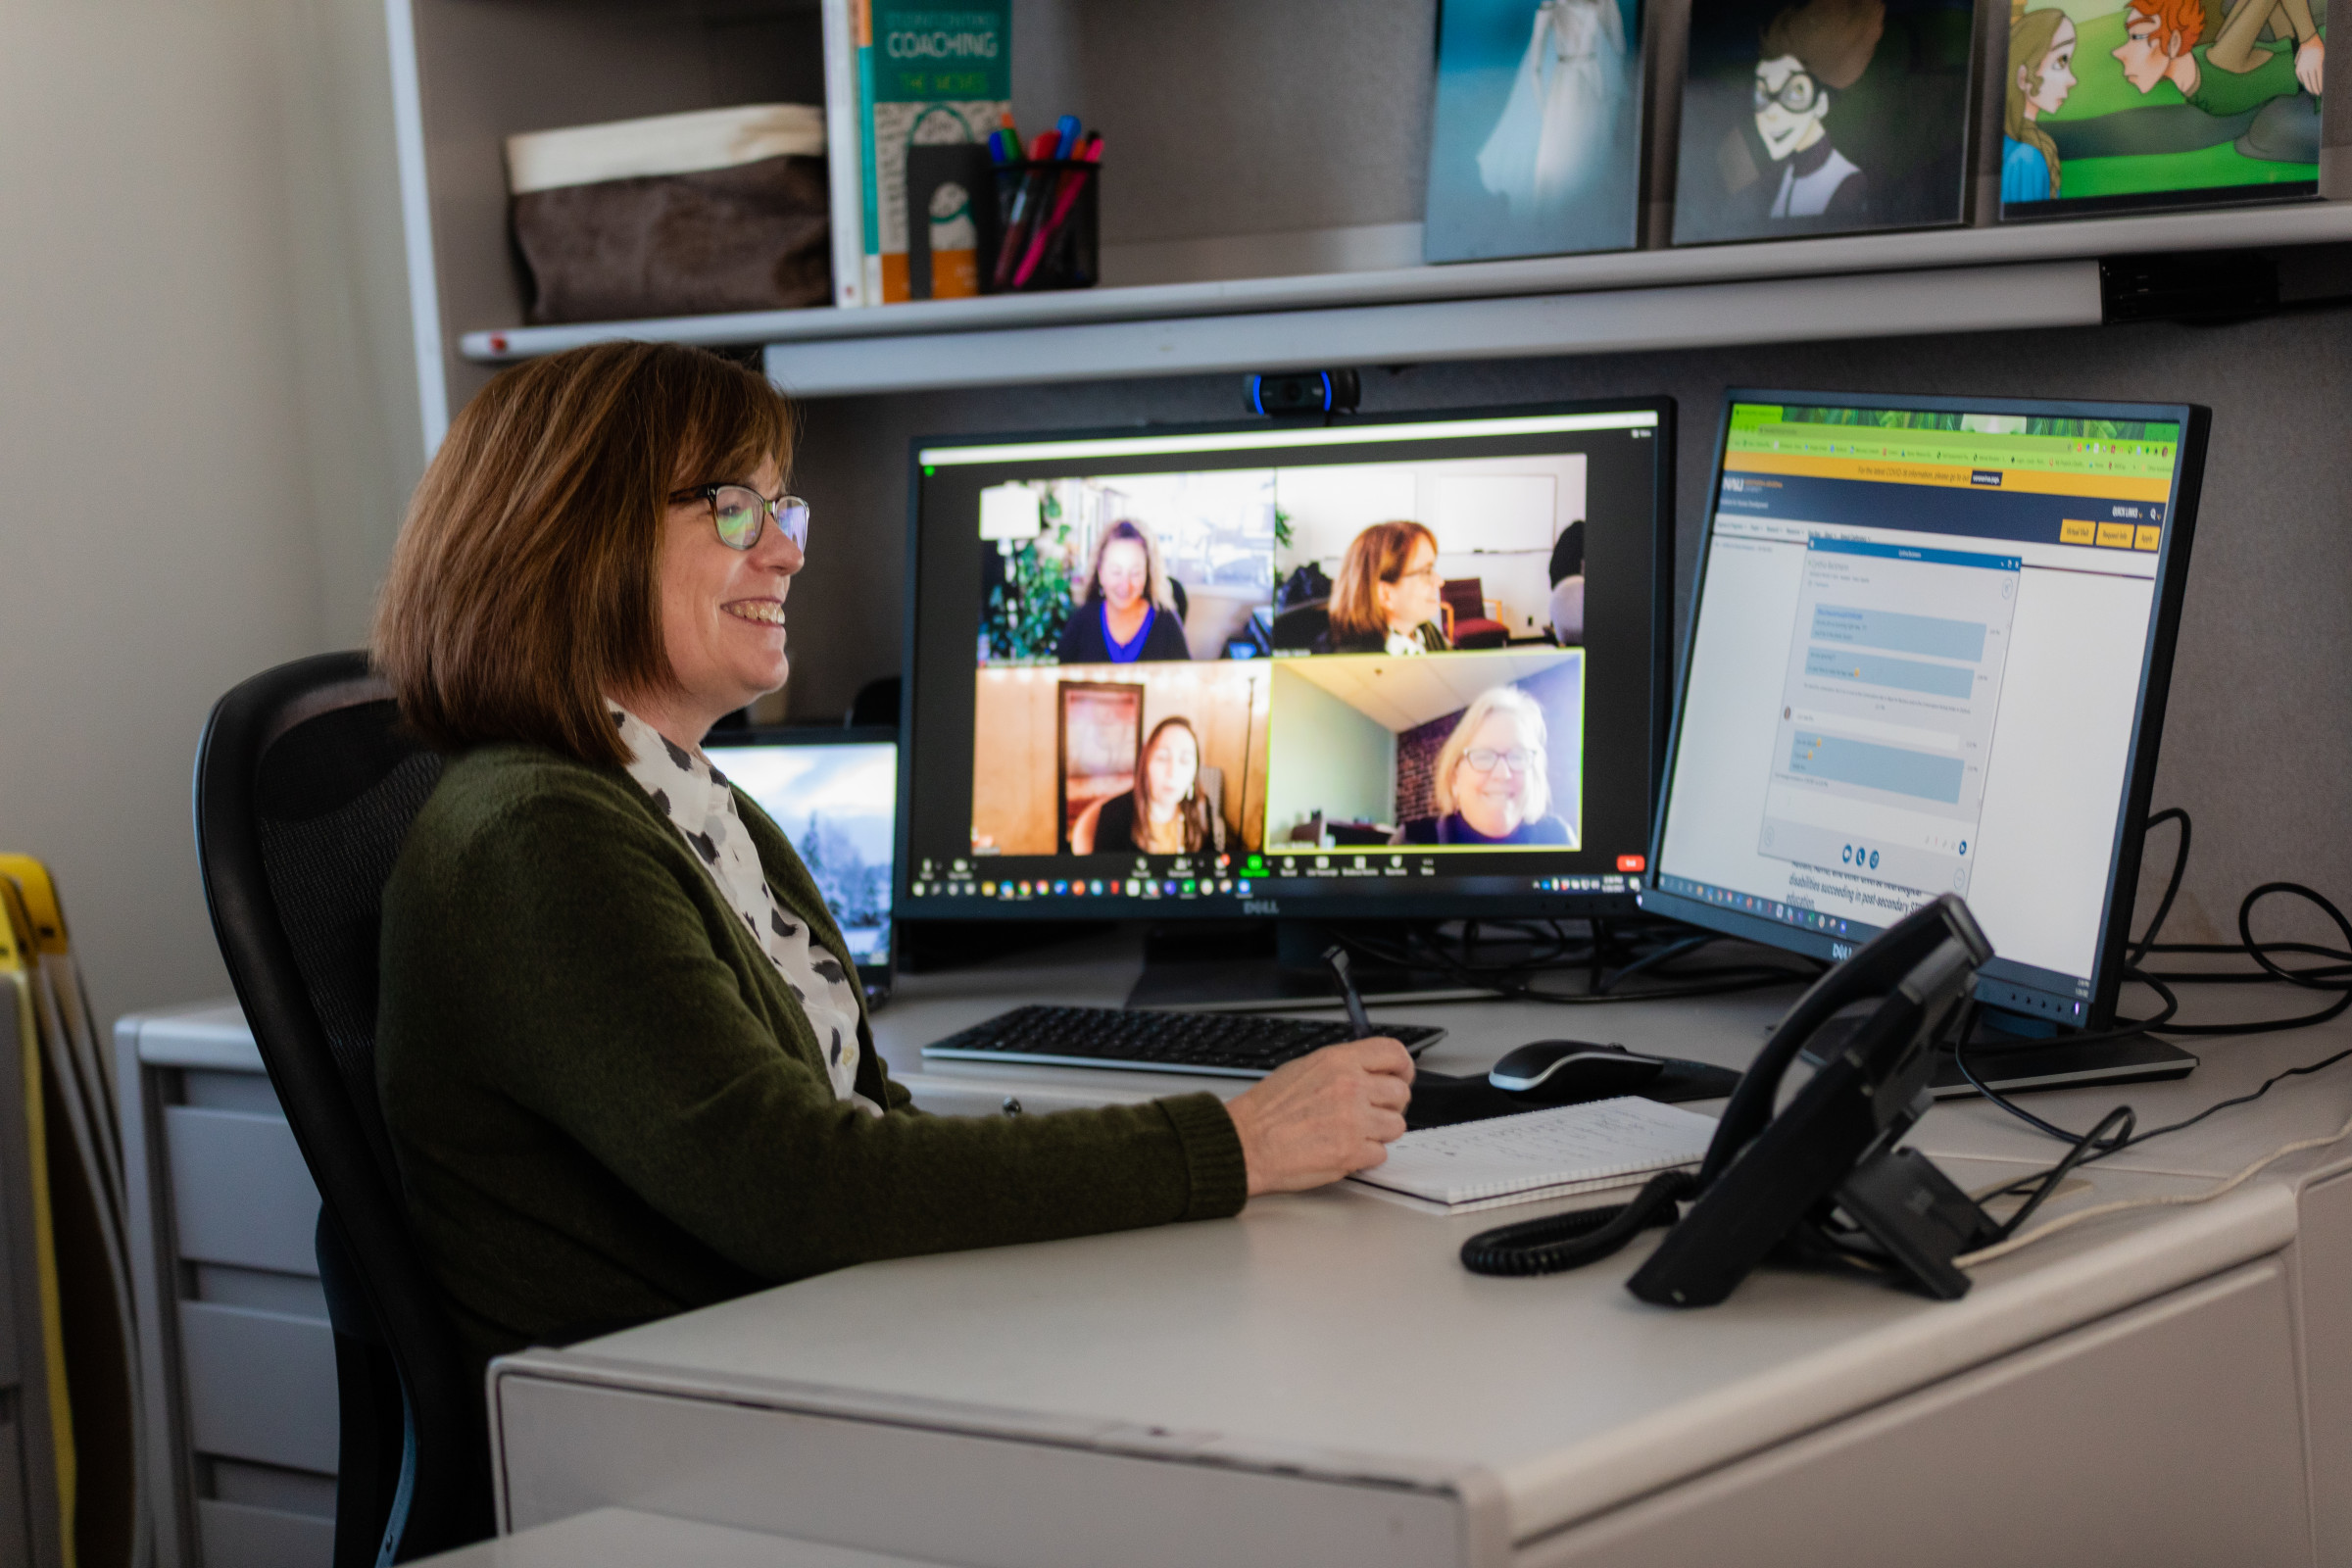 Department of Psychological Sciences Associate Professor Ronda Jenson sitting at her desk visiting with colleagues during a zoom call.